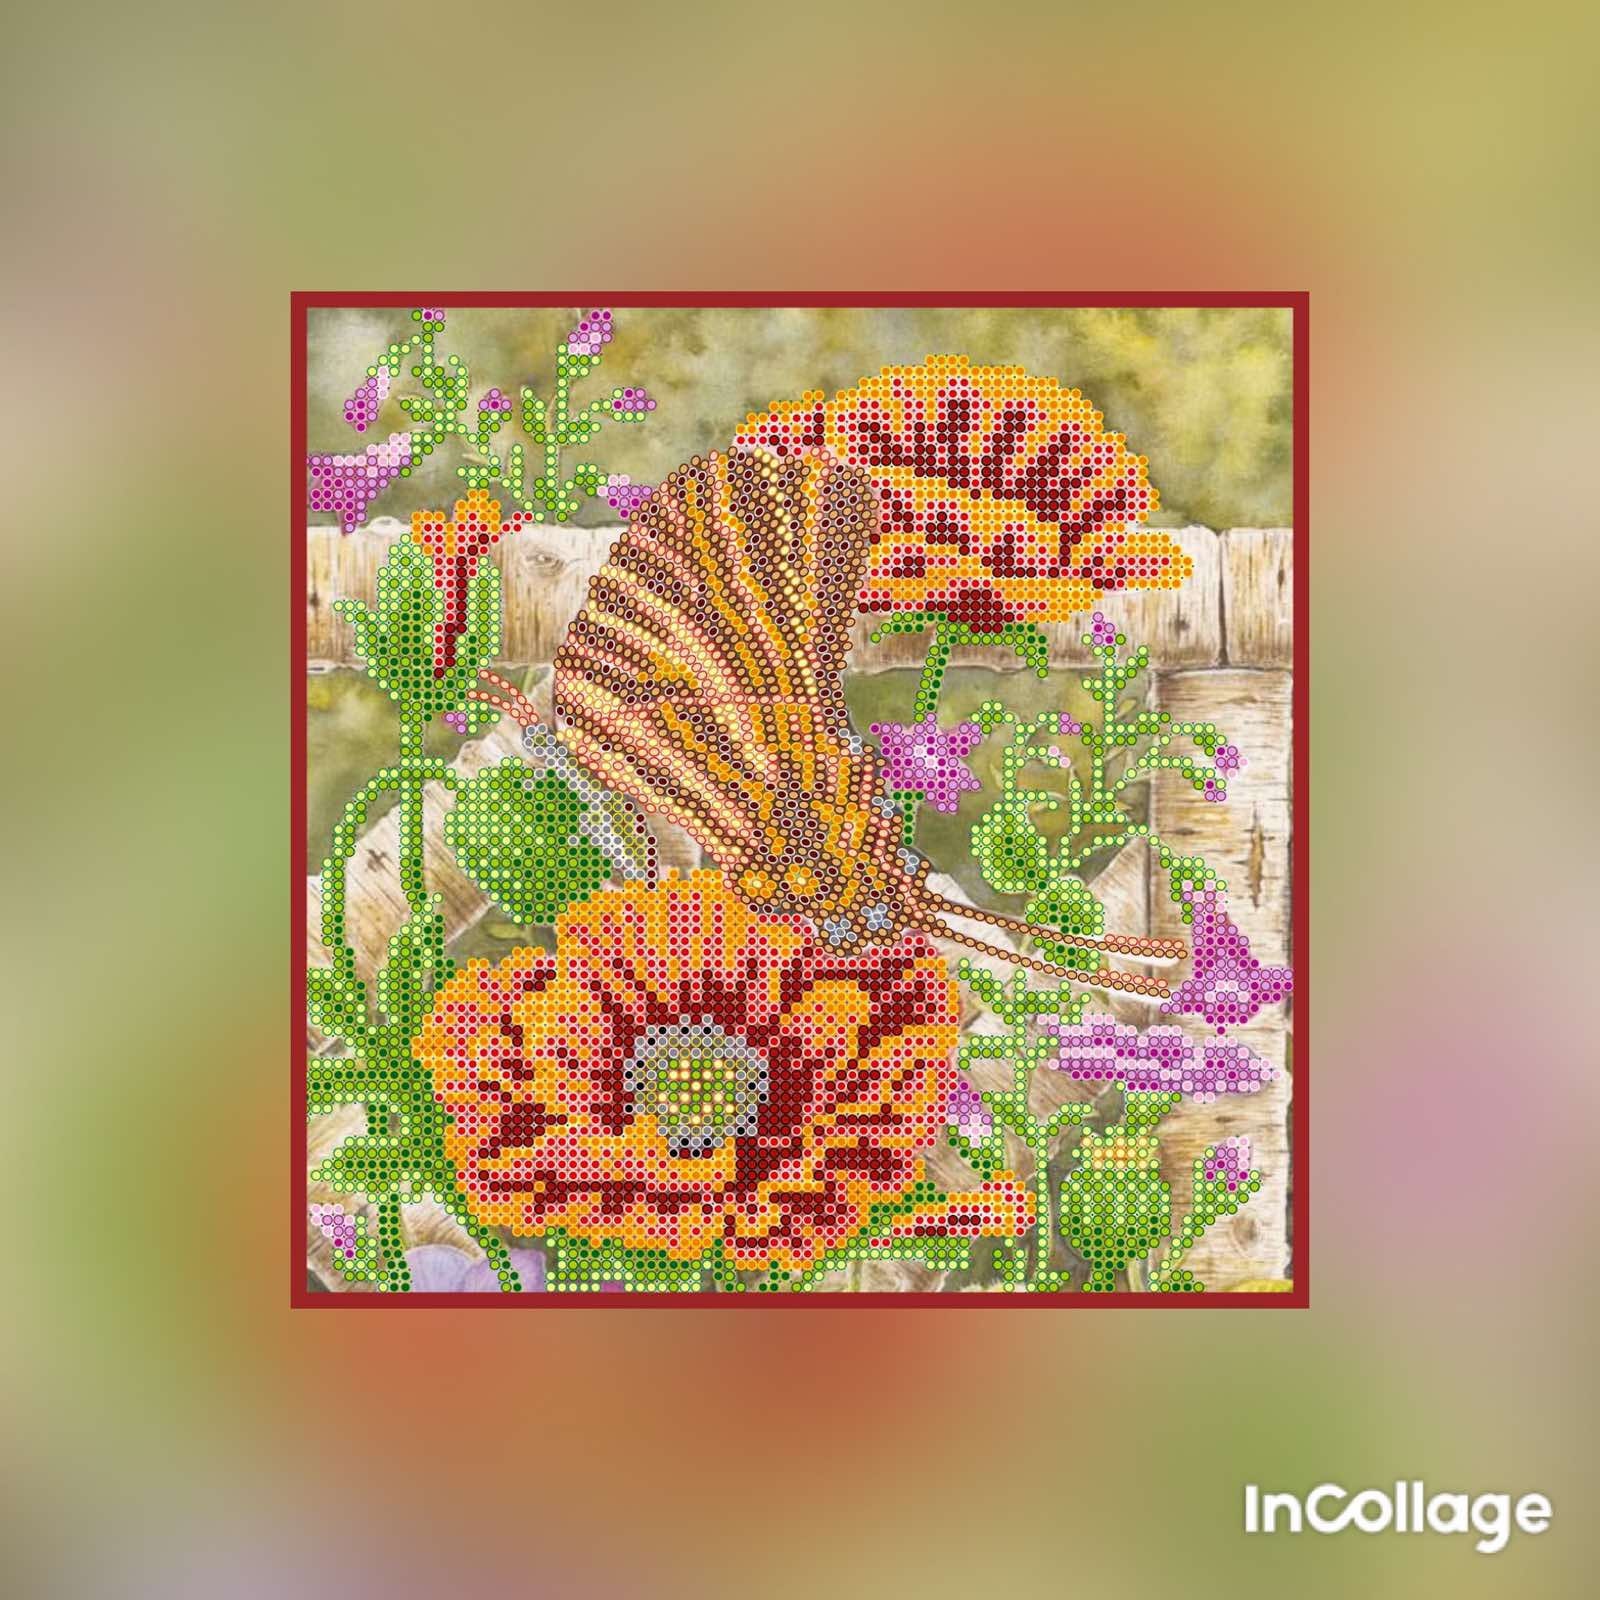 DIY Bead Embroidery Kit, Beaded Wall Art, Bead Art Pictures, Craft Beads 